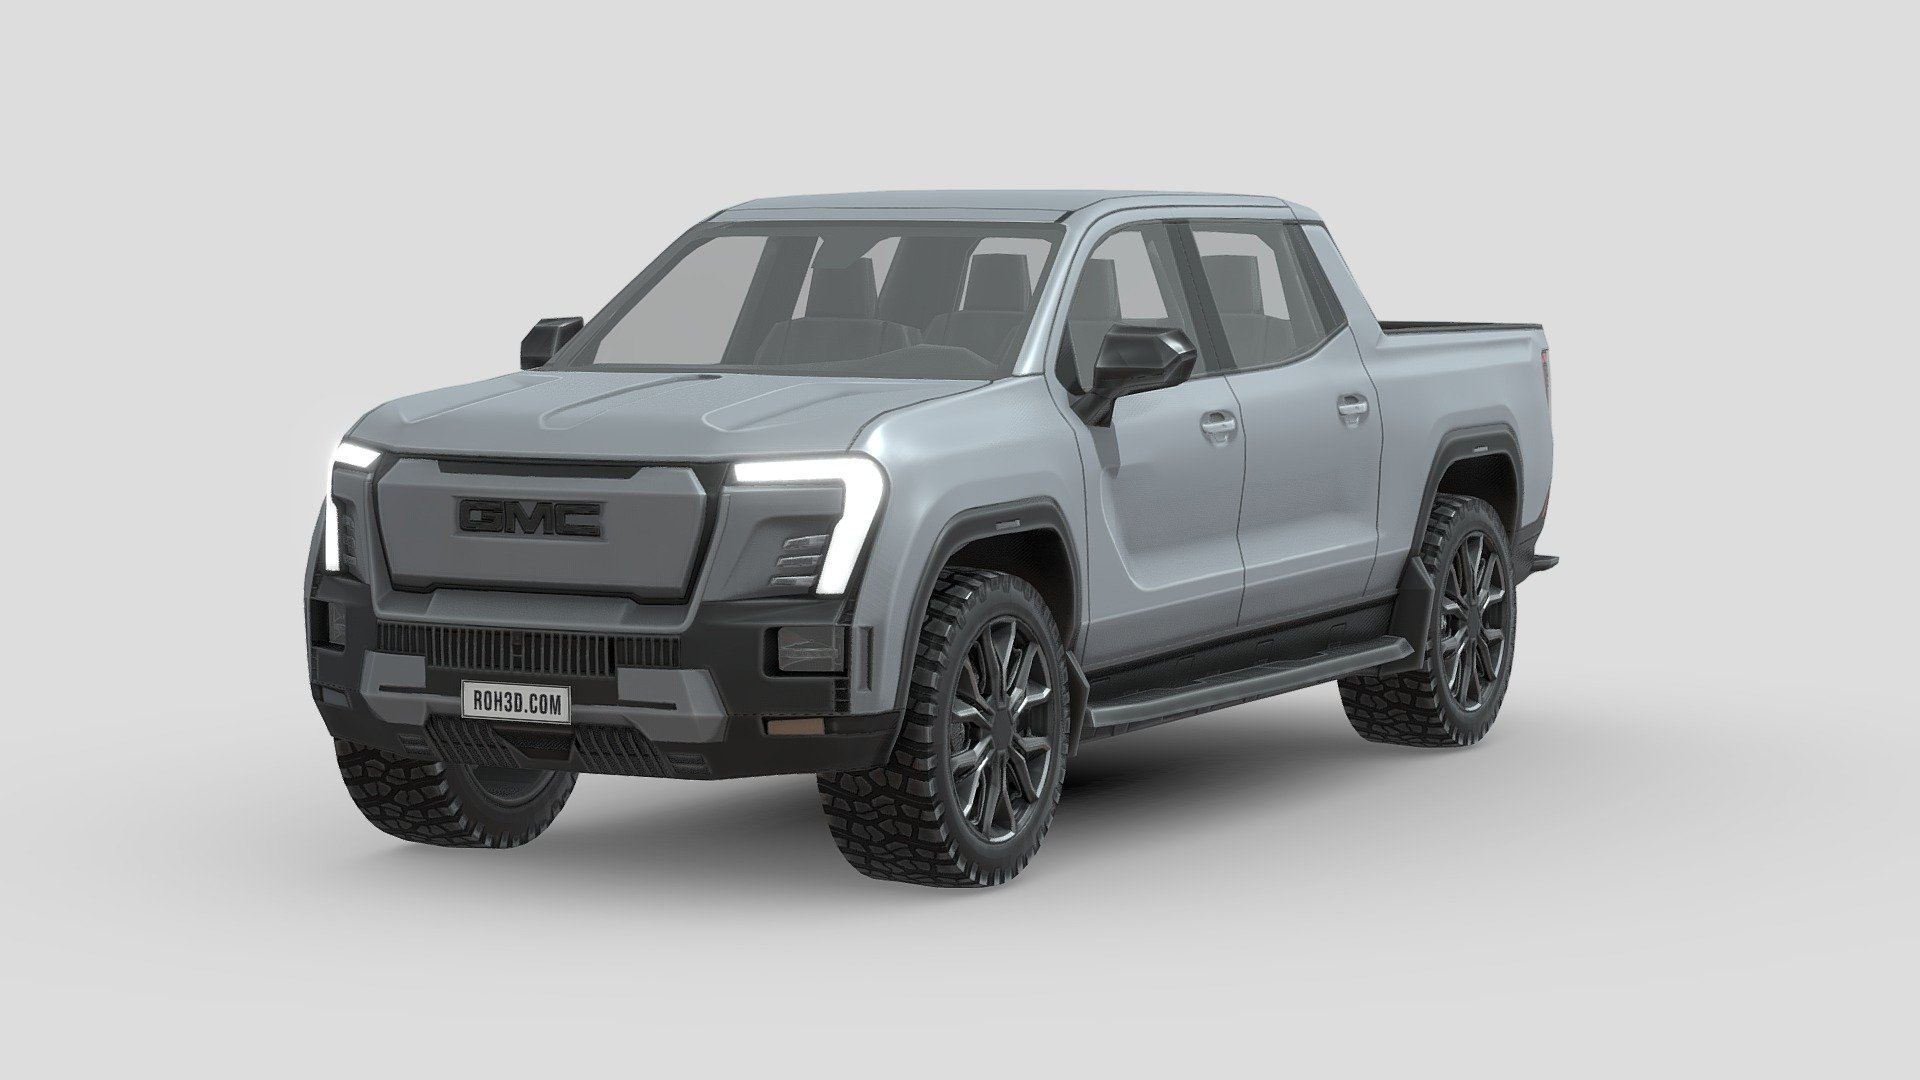 Low poly GMC Sierra EV 2024

🌟 Rev up your 3D art game with our super-fun, crazy-detailed looking 3D car model!

🚀 Combining the magic of high-quality PBR textures with the power of low poly design, this masterpiece is perfect for jaw-dropping close-ups and seamlessly fits into any project.

❤️ You’ll fall in love with its mind-blowing detail and lightning-fast performance, thanks to pro-level topology and perfect surface flow poly action. Plus, it just works with all major 3D software and render engines 3d model